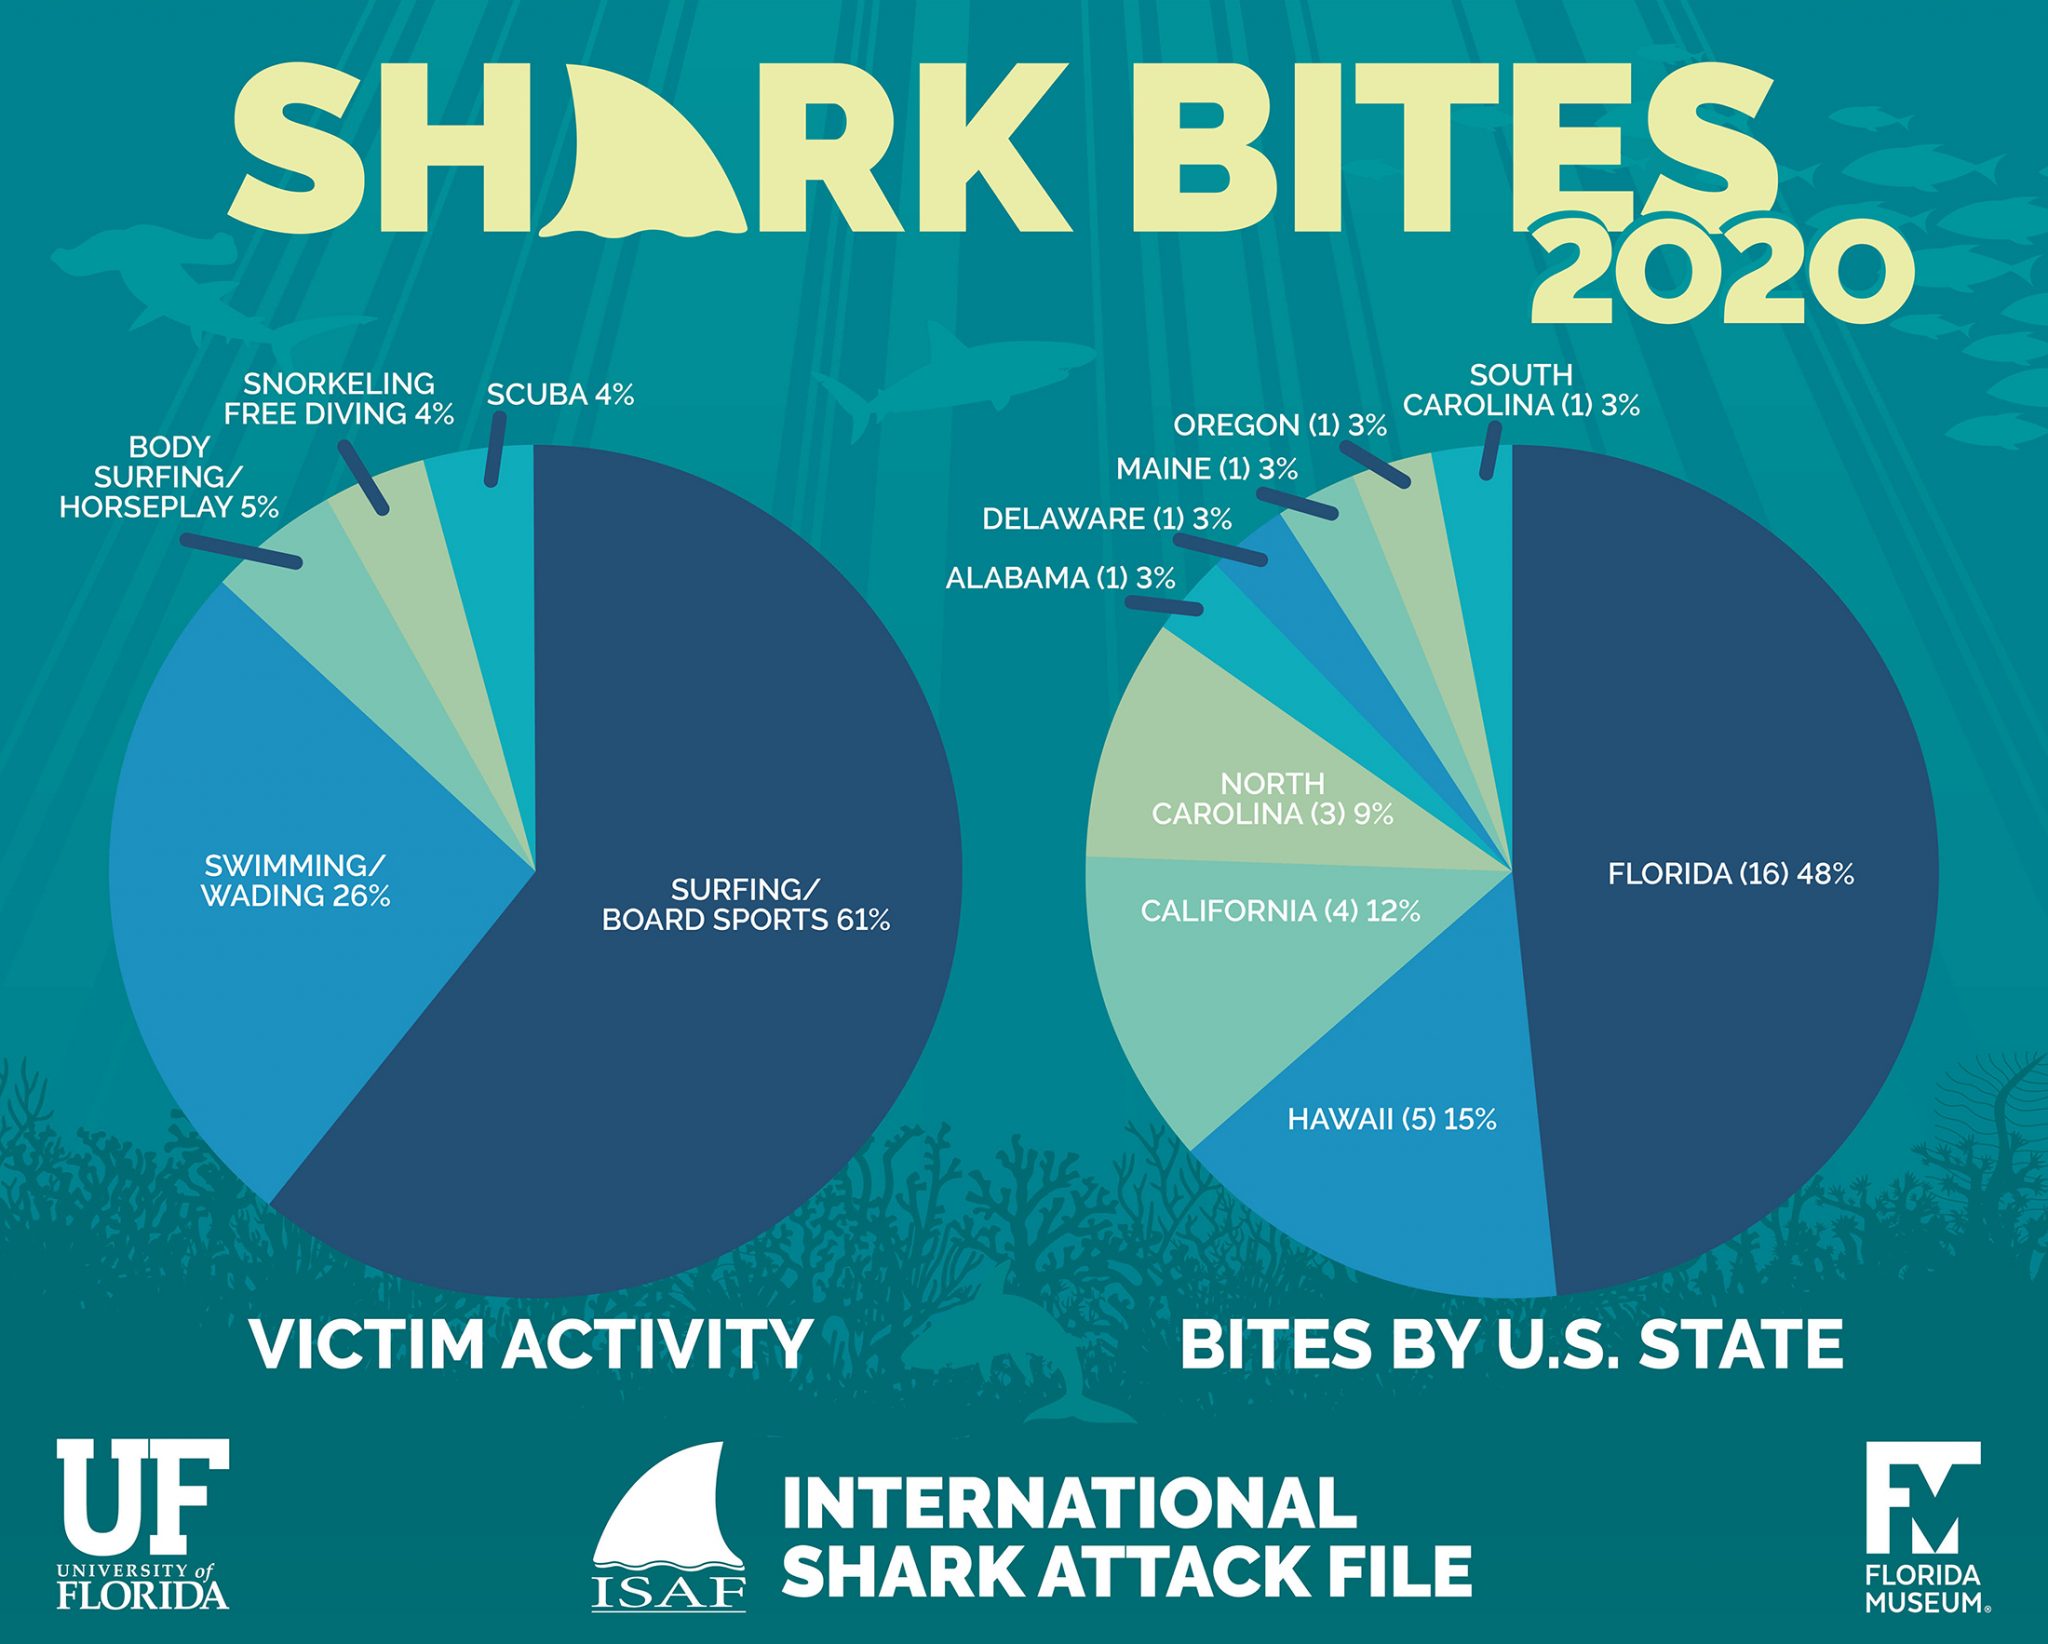 Few shark attacks in 2020, but fatalities spikes